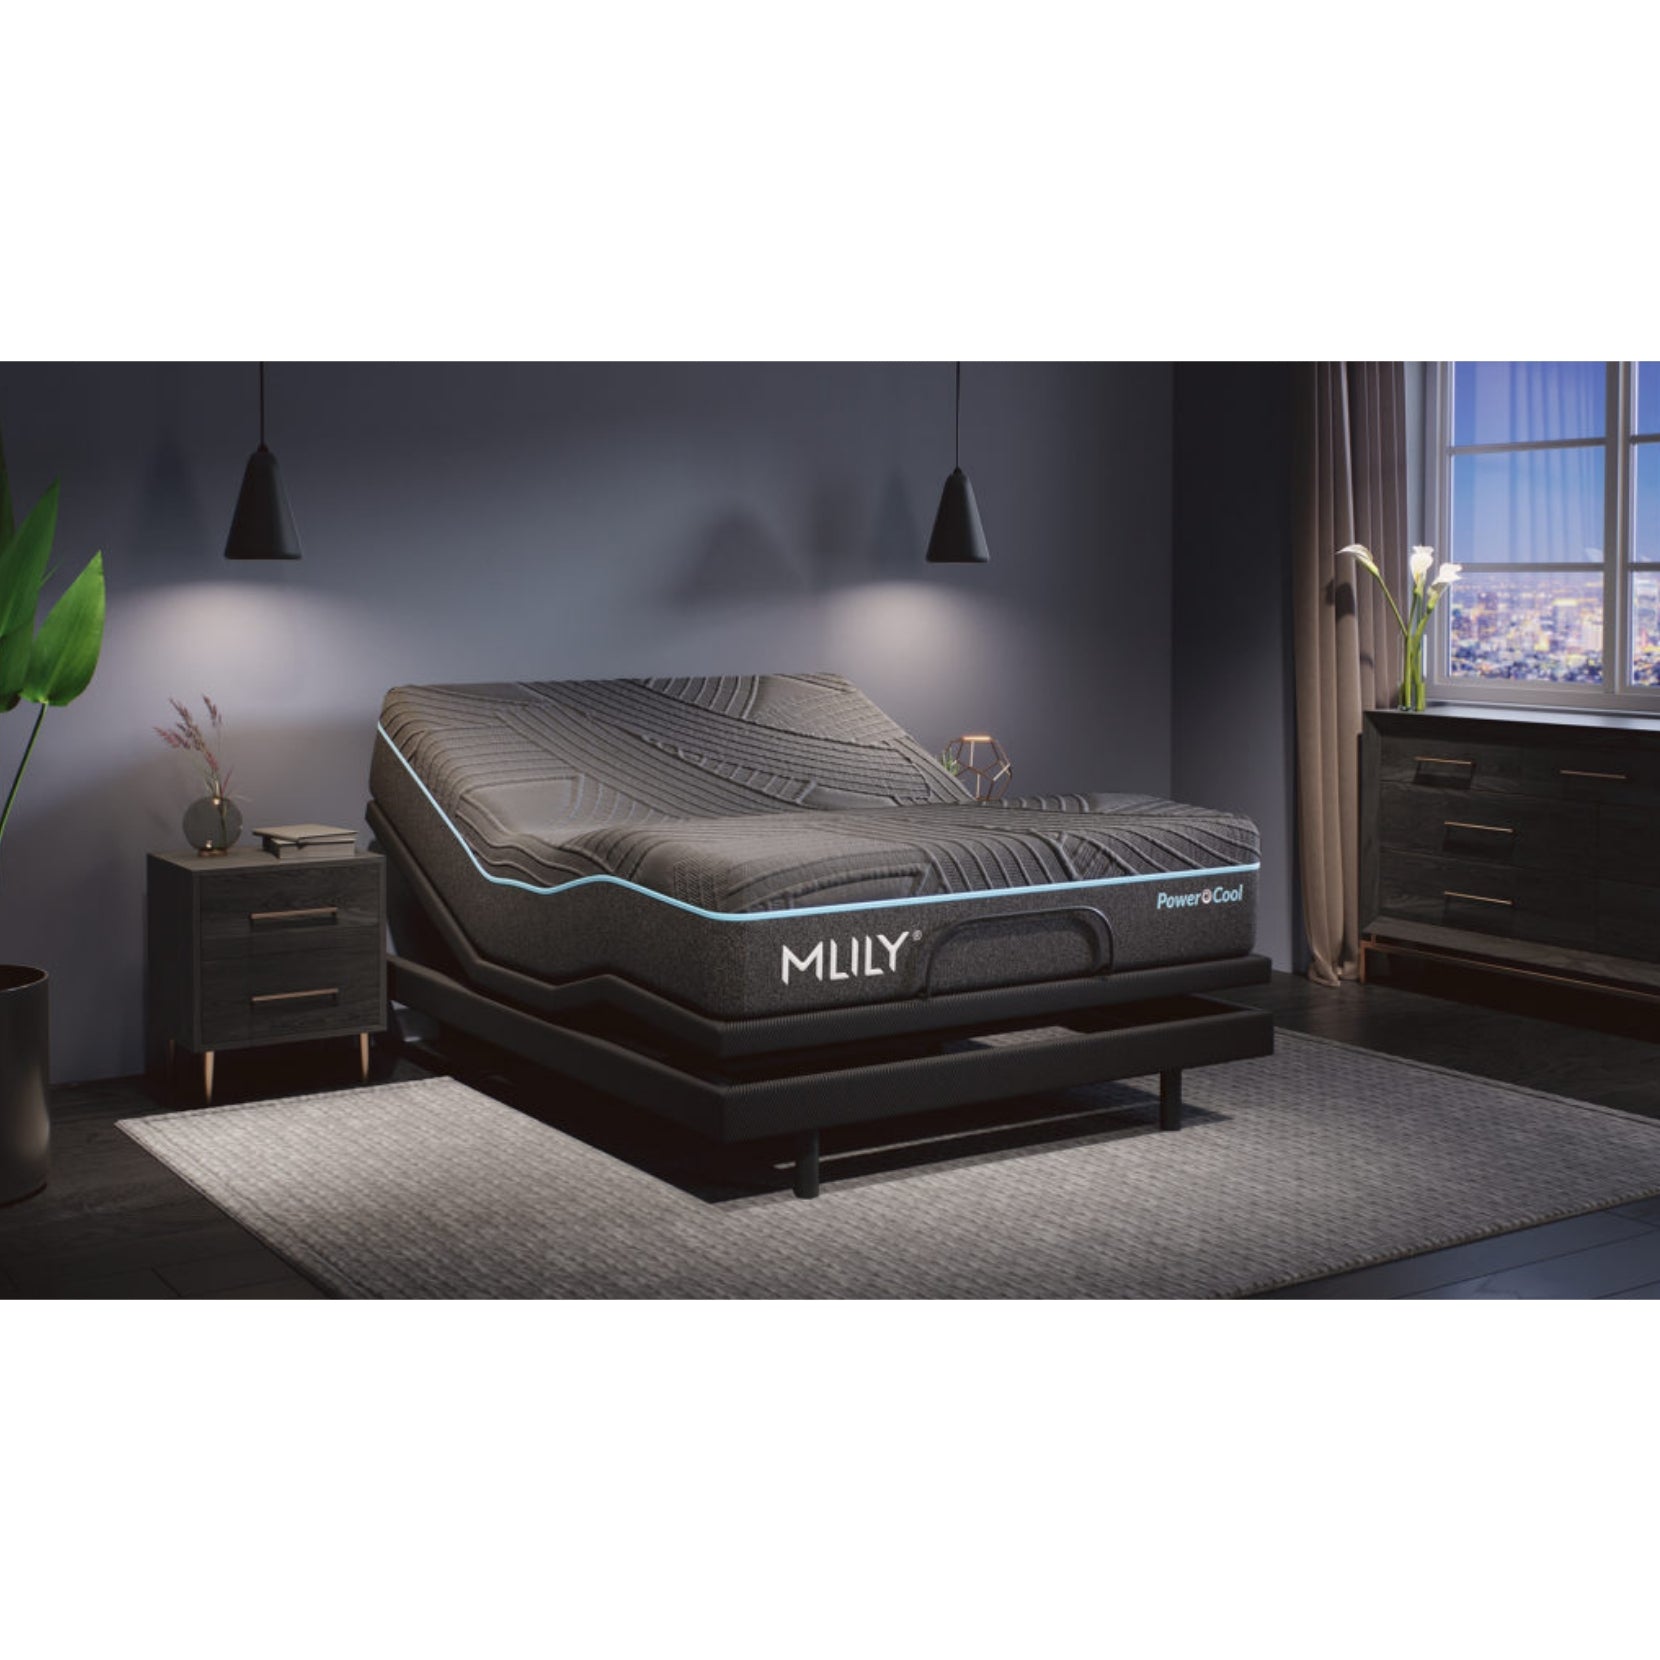 Firm PowerCool 11.5" Hybrid Mattress With Ventilated Memory Foam Pillow(s) And Adjustable Base Featuring Integrated Cooling Fans Inside Of A Bedroom With Head And Foot Partially Raised, Corner View